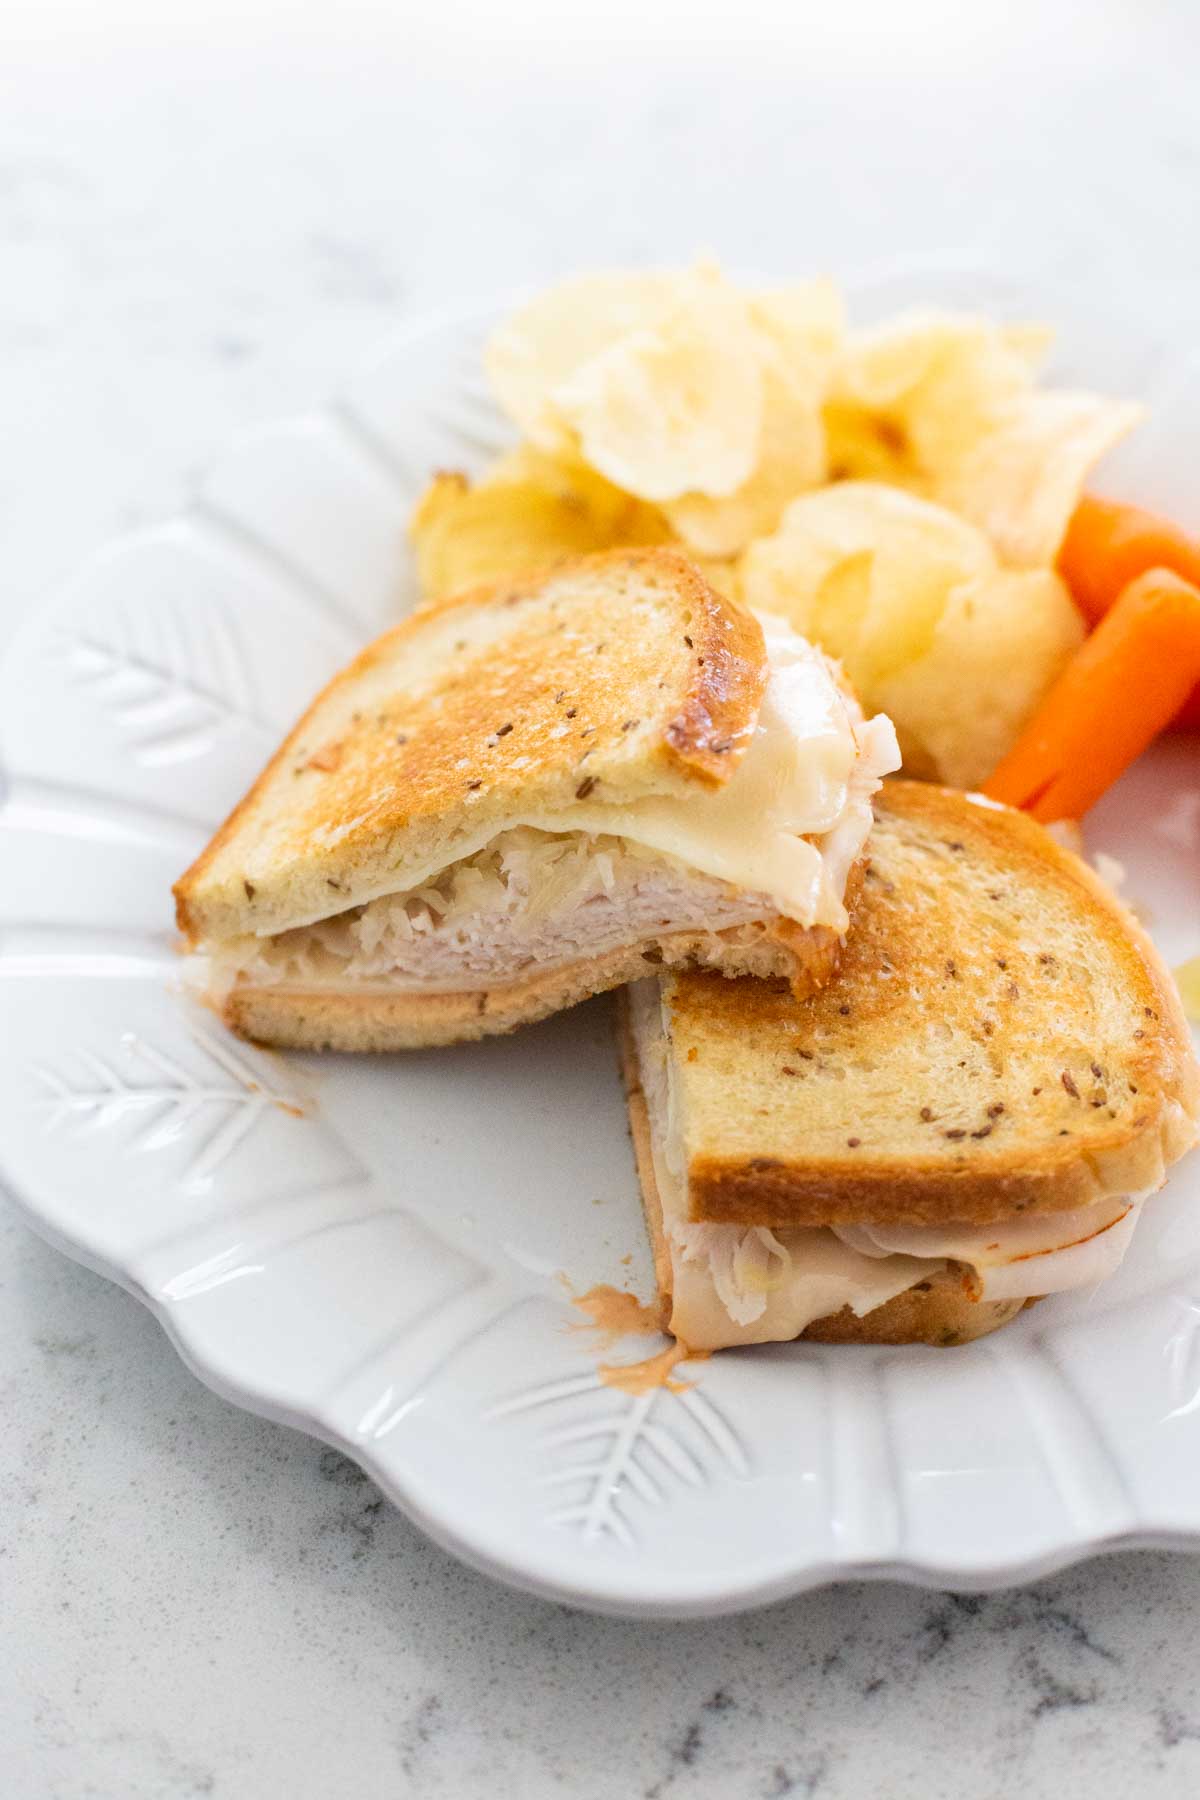 The finished turkey reuben is on a plate with potato chips and carrots.